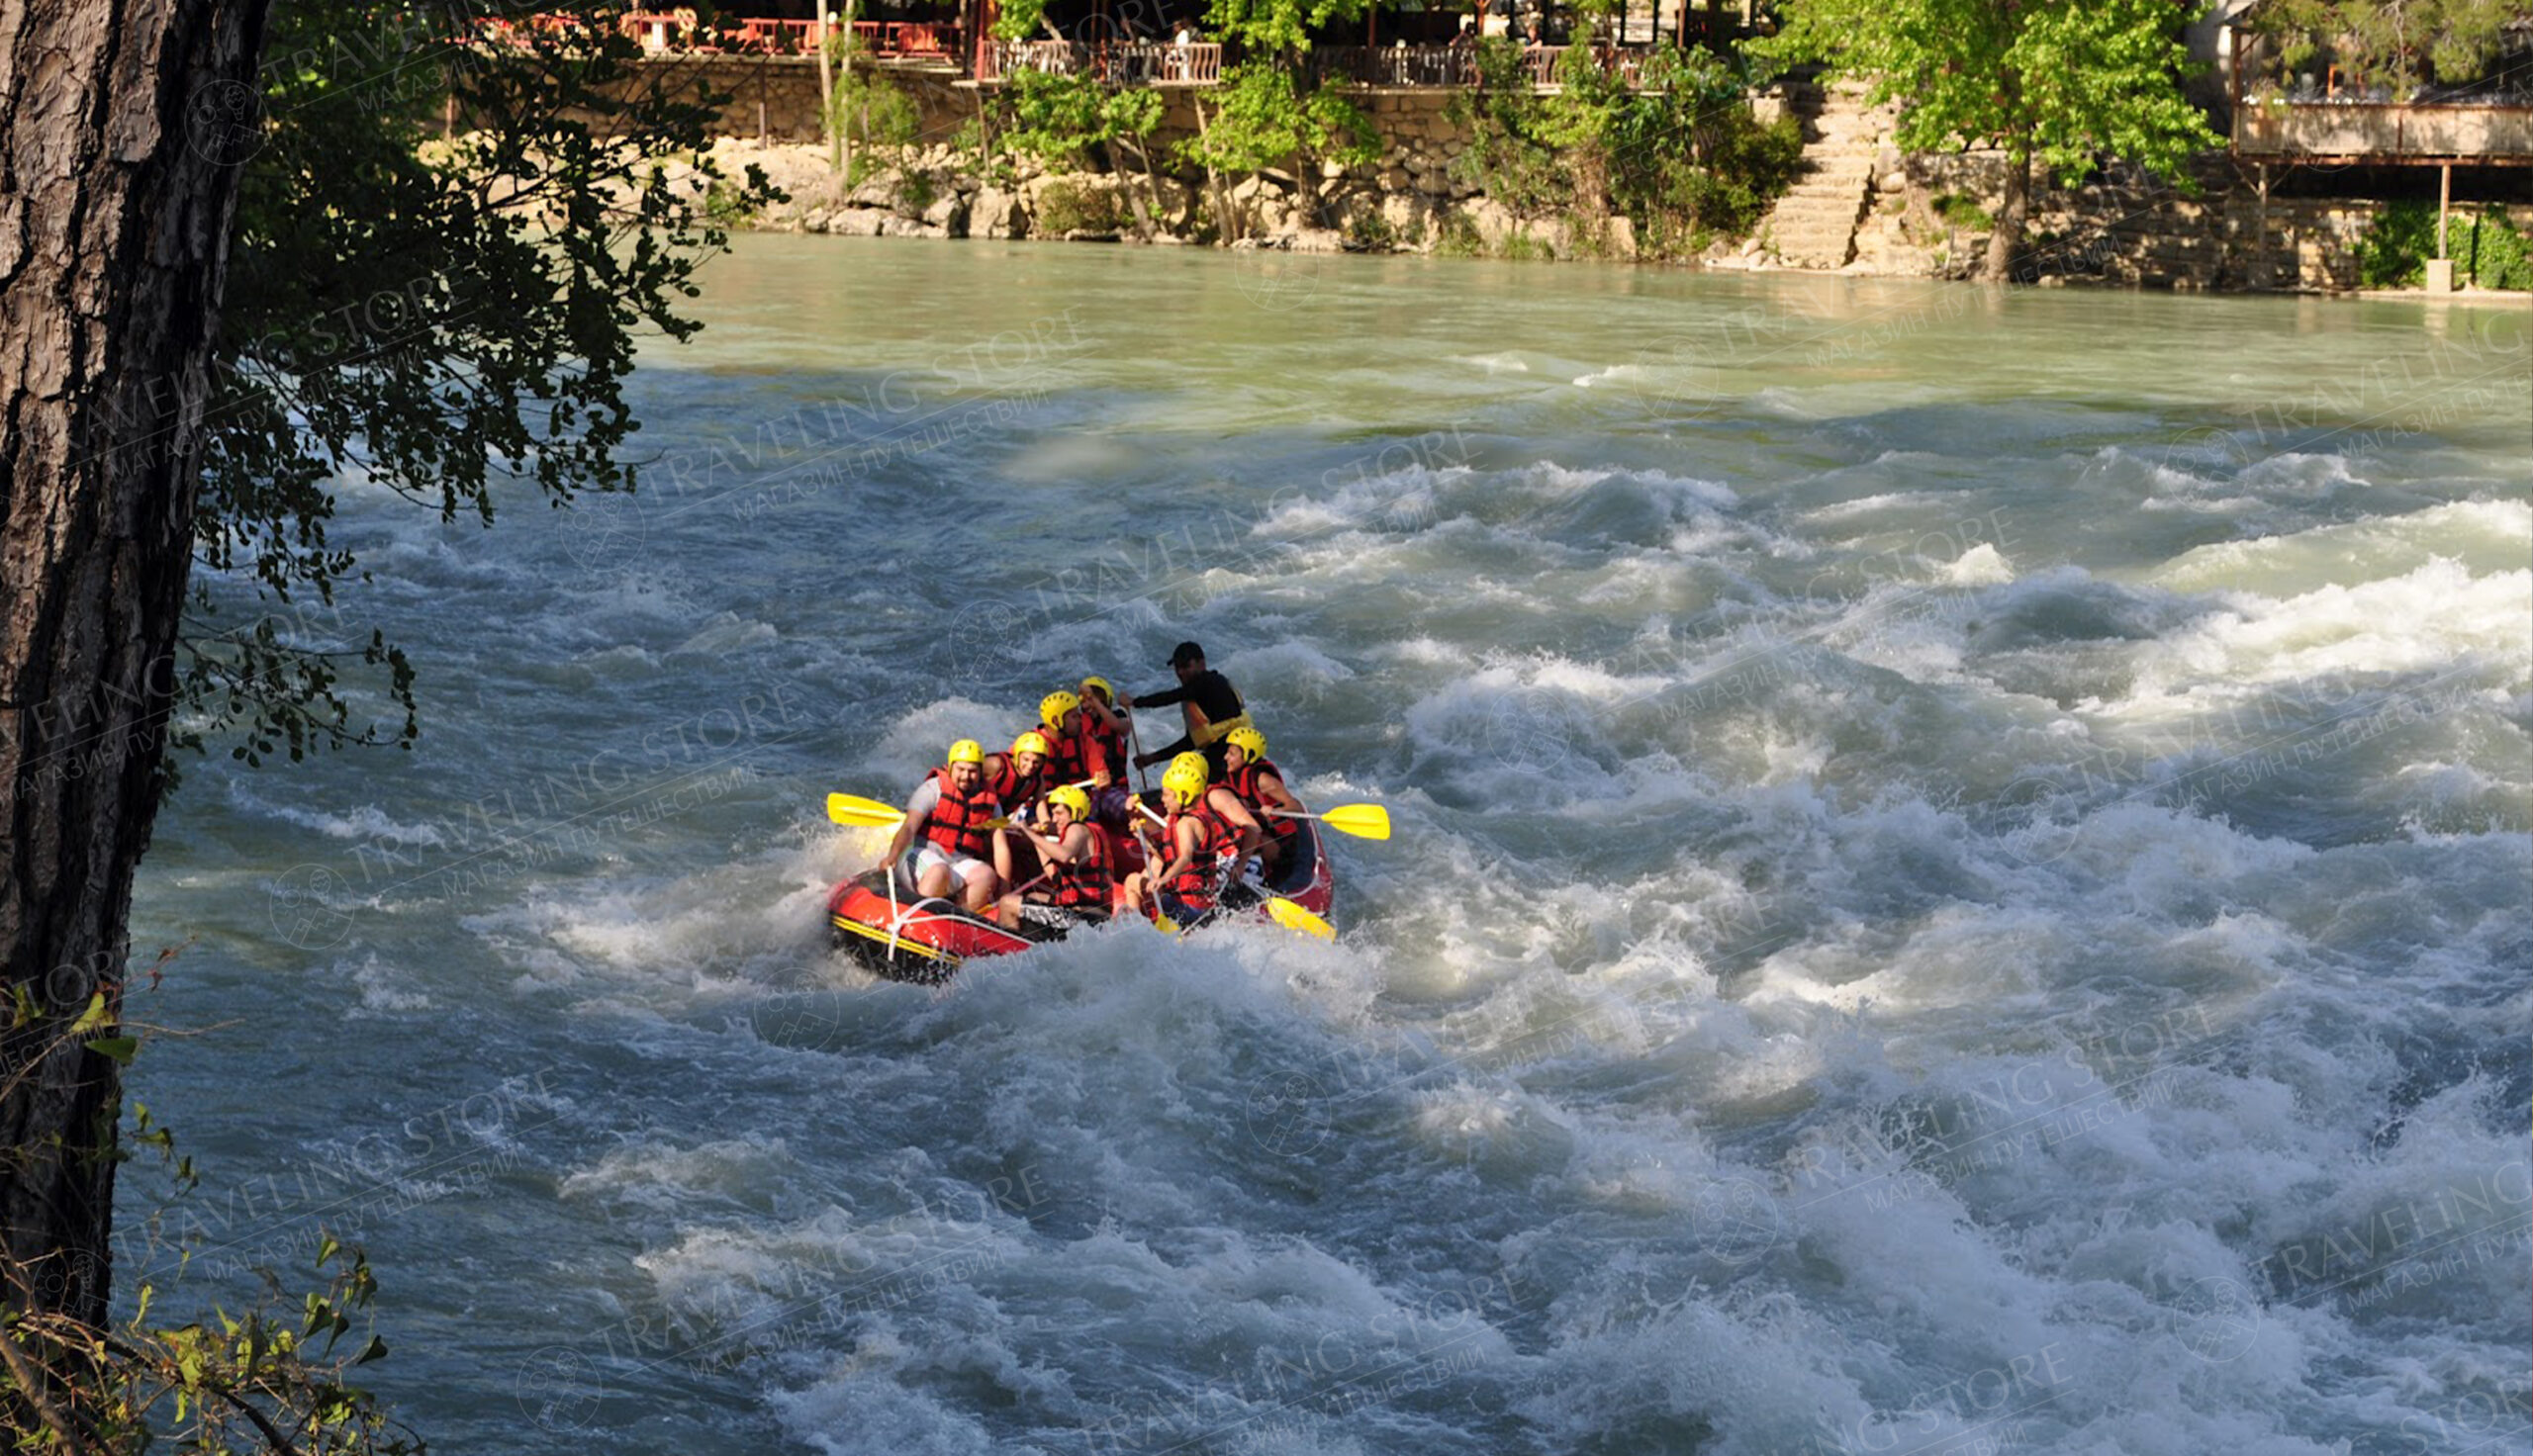 Rafting Tour from Belek: an active holiday in the picturesque national park